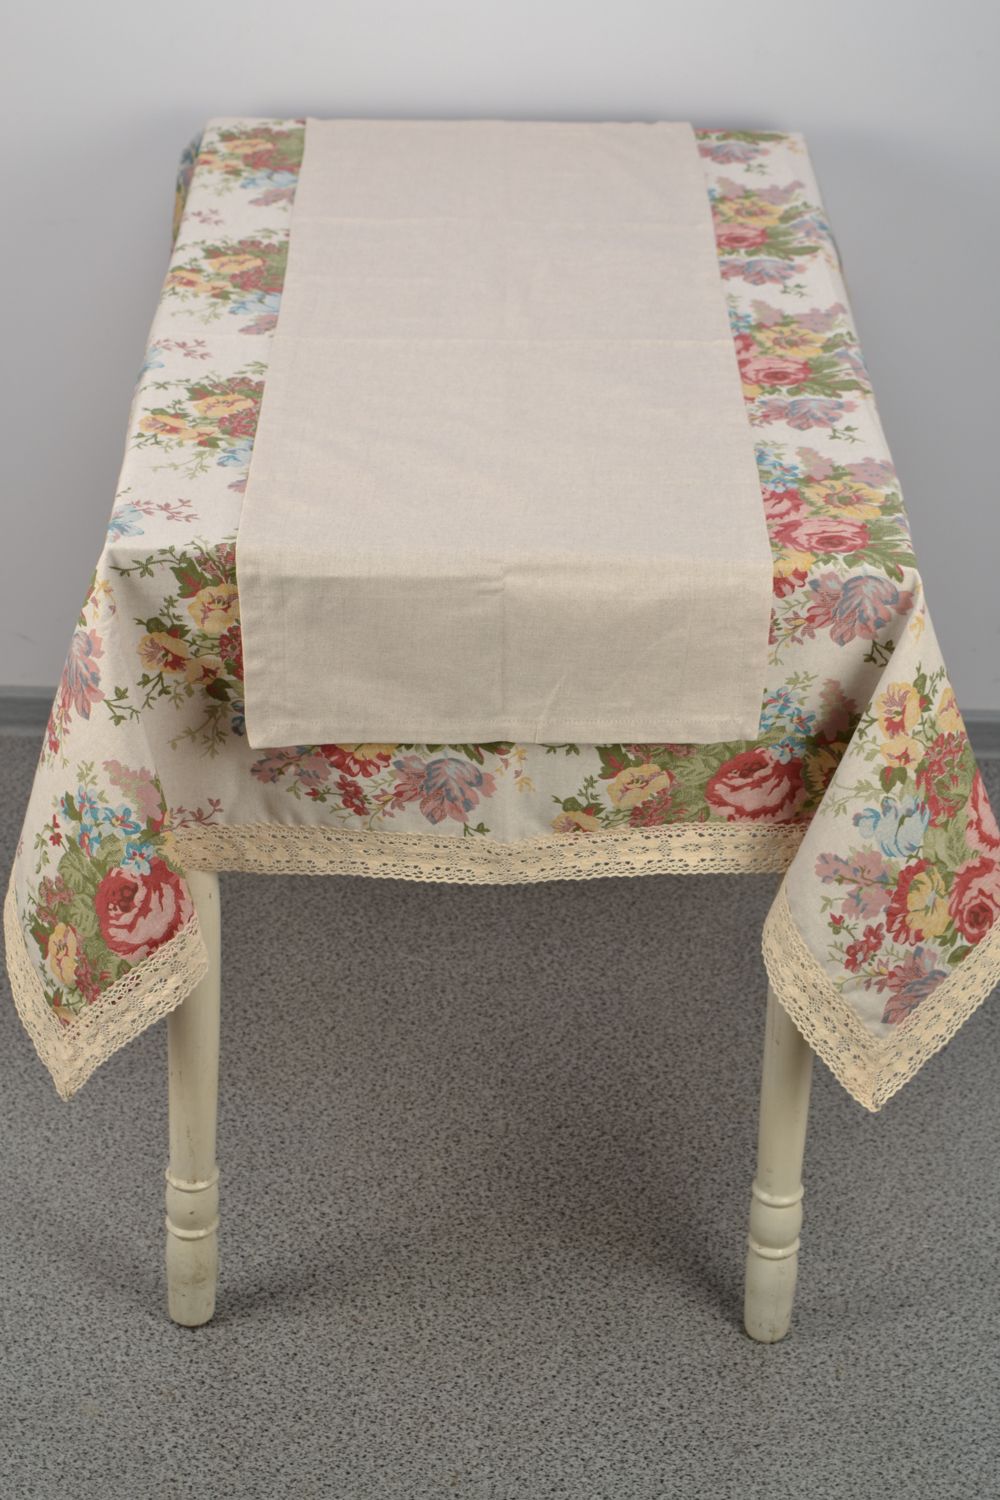 Handmade tablecloth made of cotton and polyamide with floral print and lace photo 2